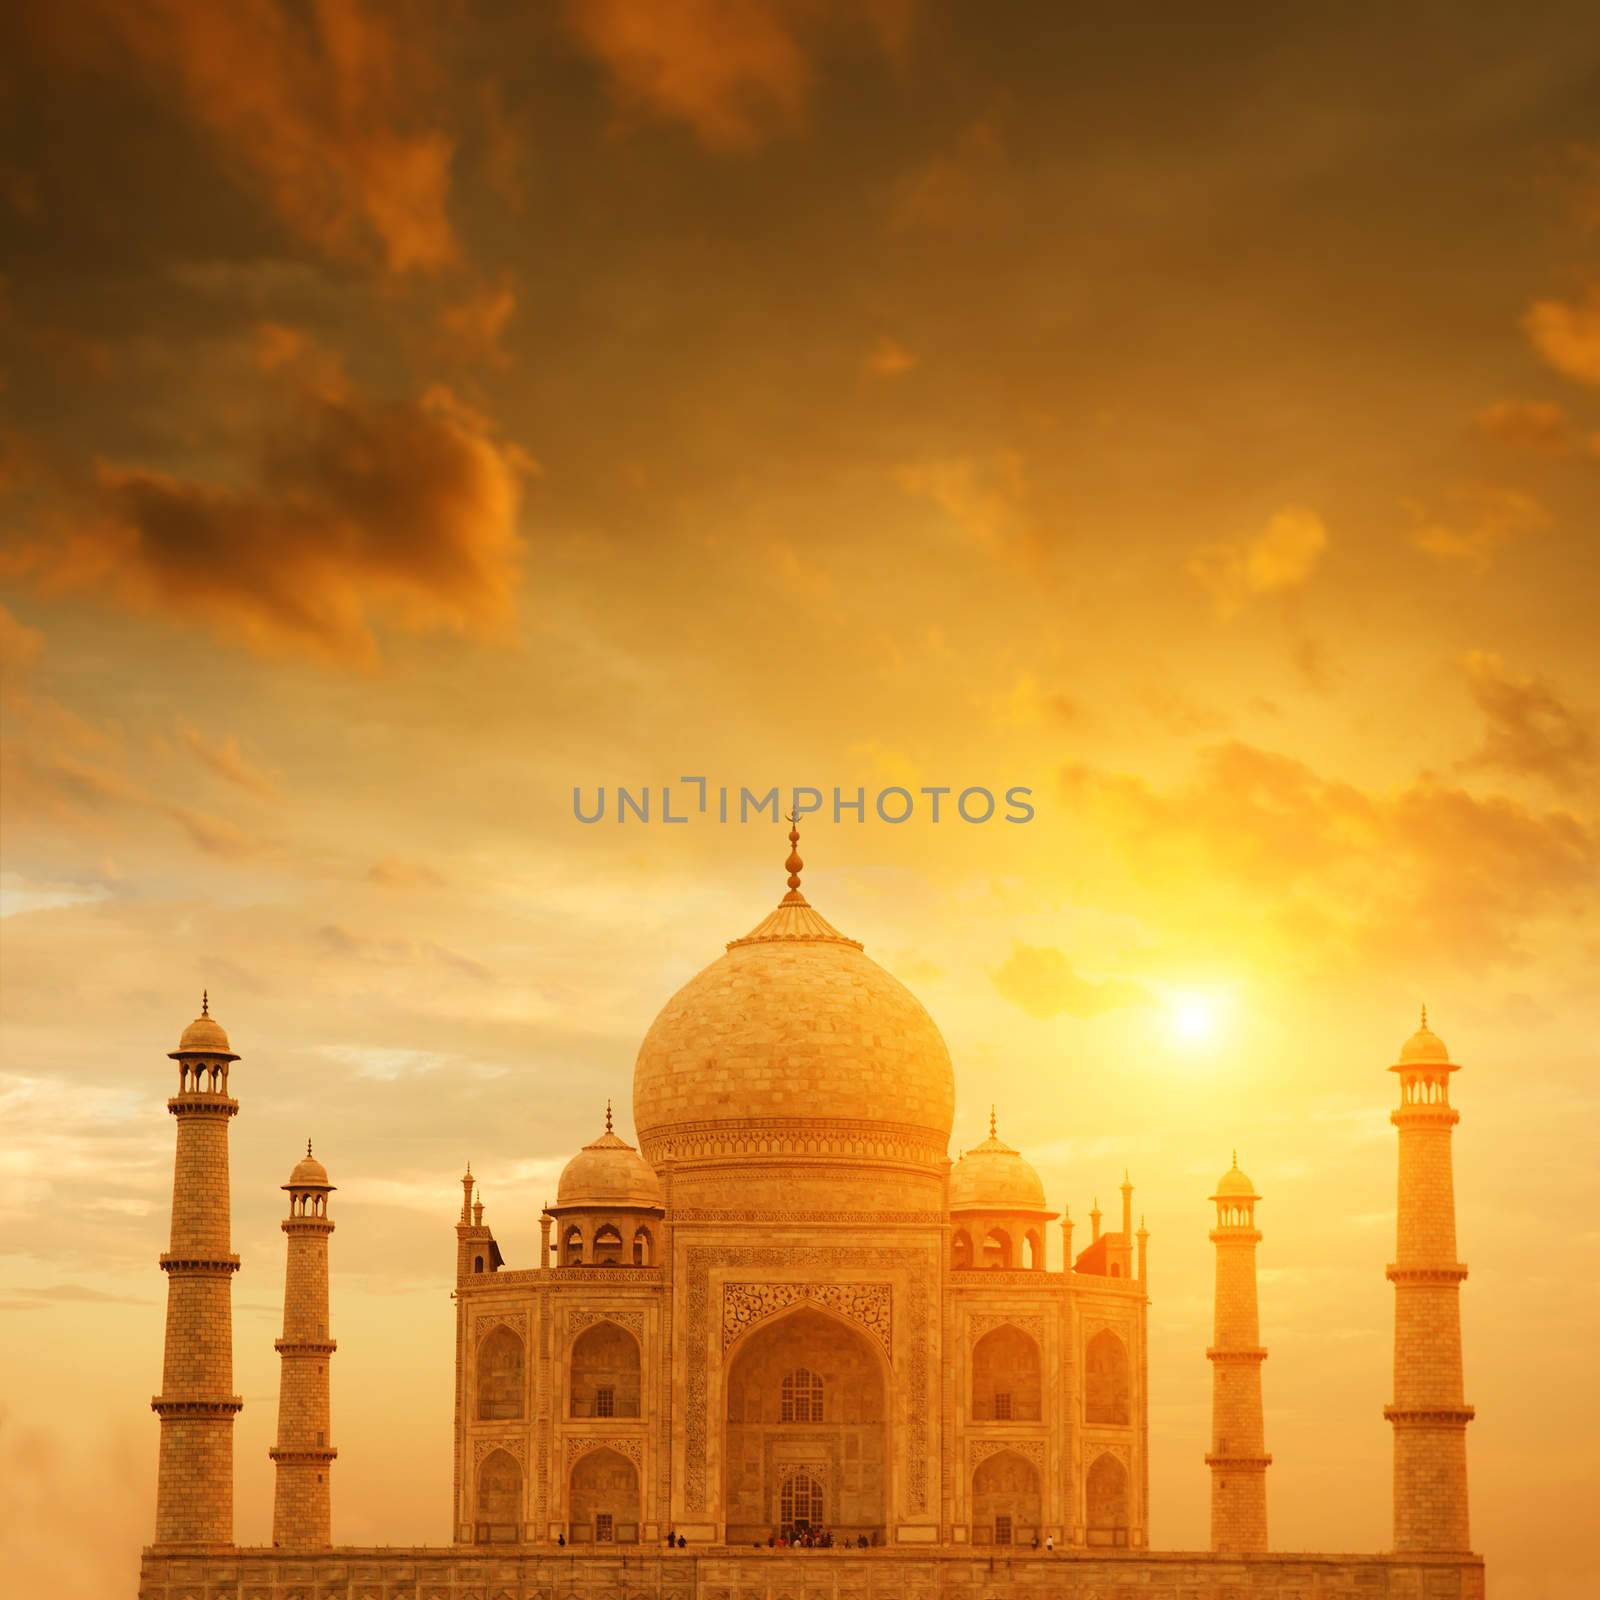 Front view Taj Mahal in Agra, India on sunset.